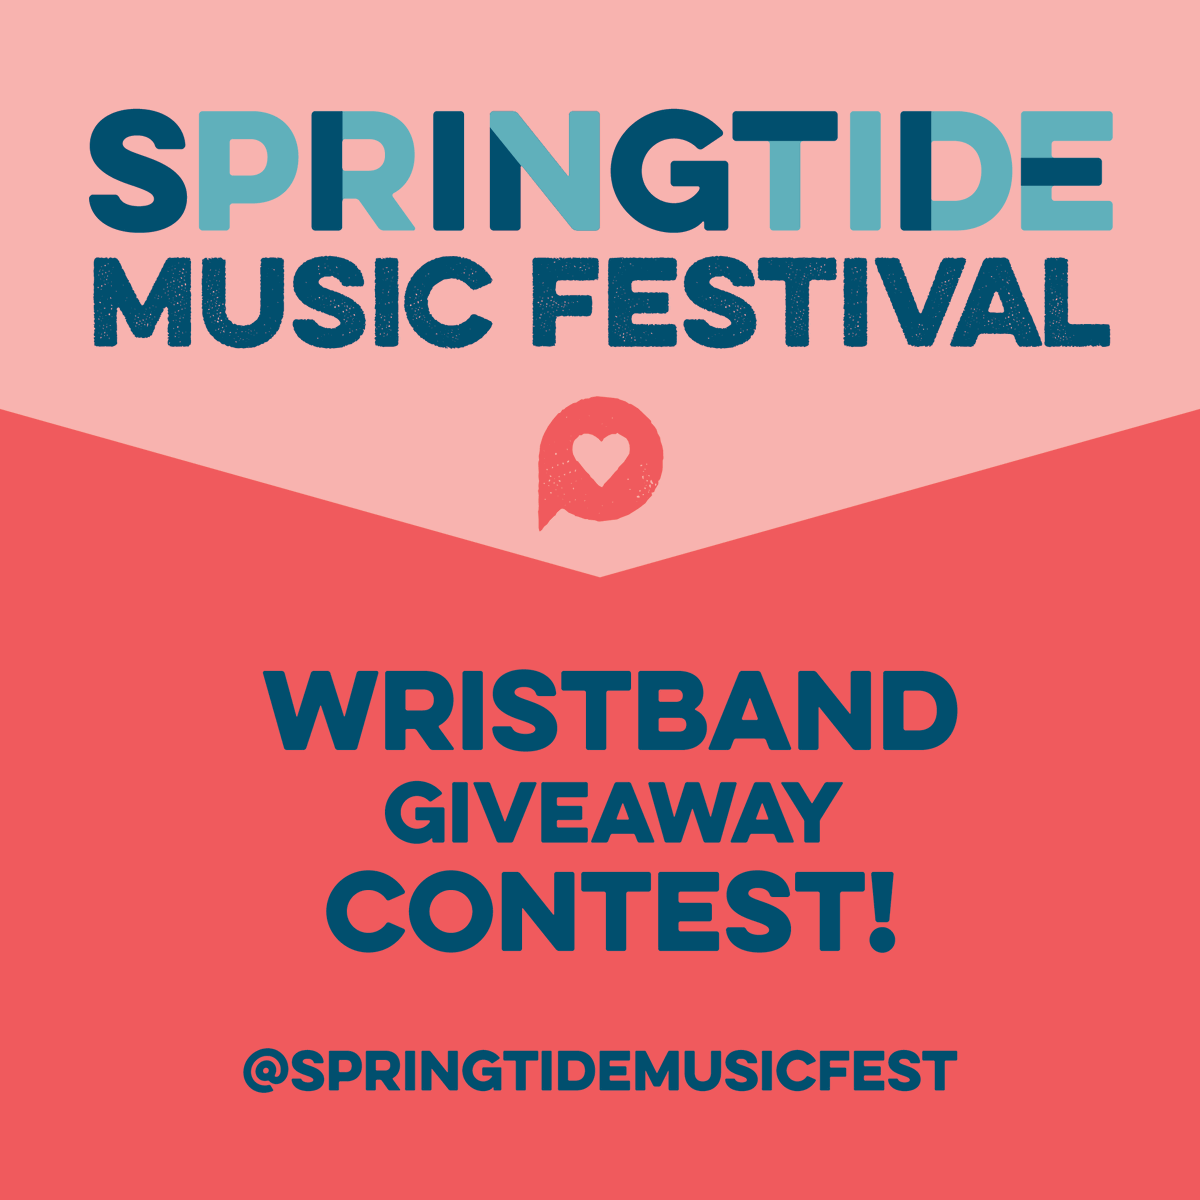 🚨GIVEAWAY ALERT🚨Win TWO weekend passes to Uxbridge's @springtide_fest running from June 6-8, and catch @hellobegonia, @monowhales, @goodlovelies, @ConorGainsMusic and many more!

To Enter:
- Like and/or retweet this post by May 30 @ 11:59pm 🕛

We'll DM the winner on May 31🎉